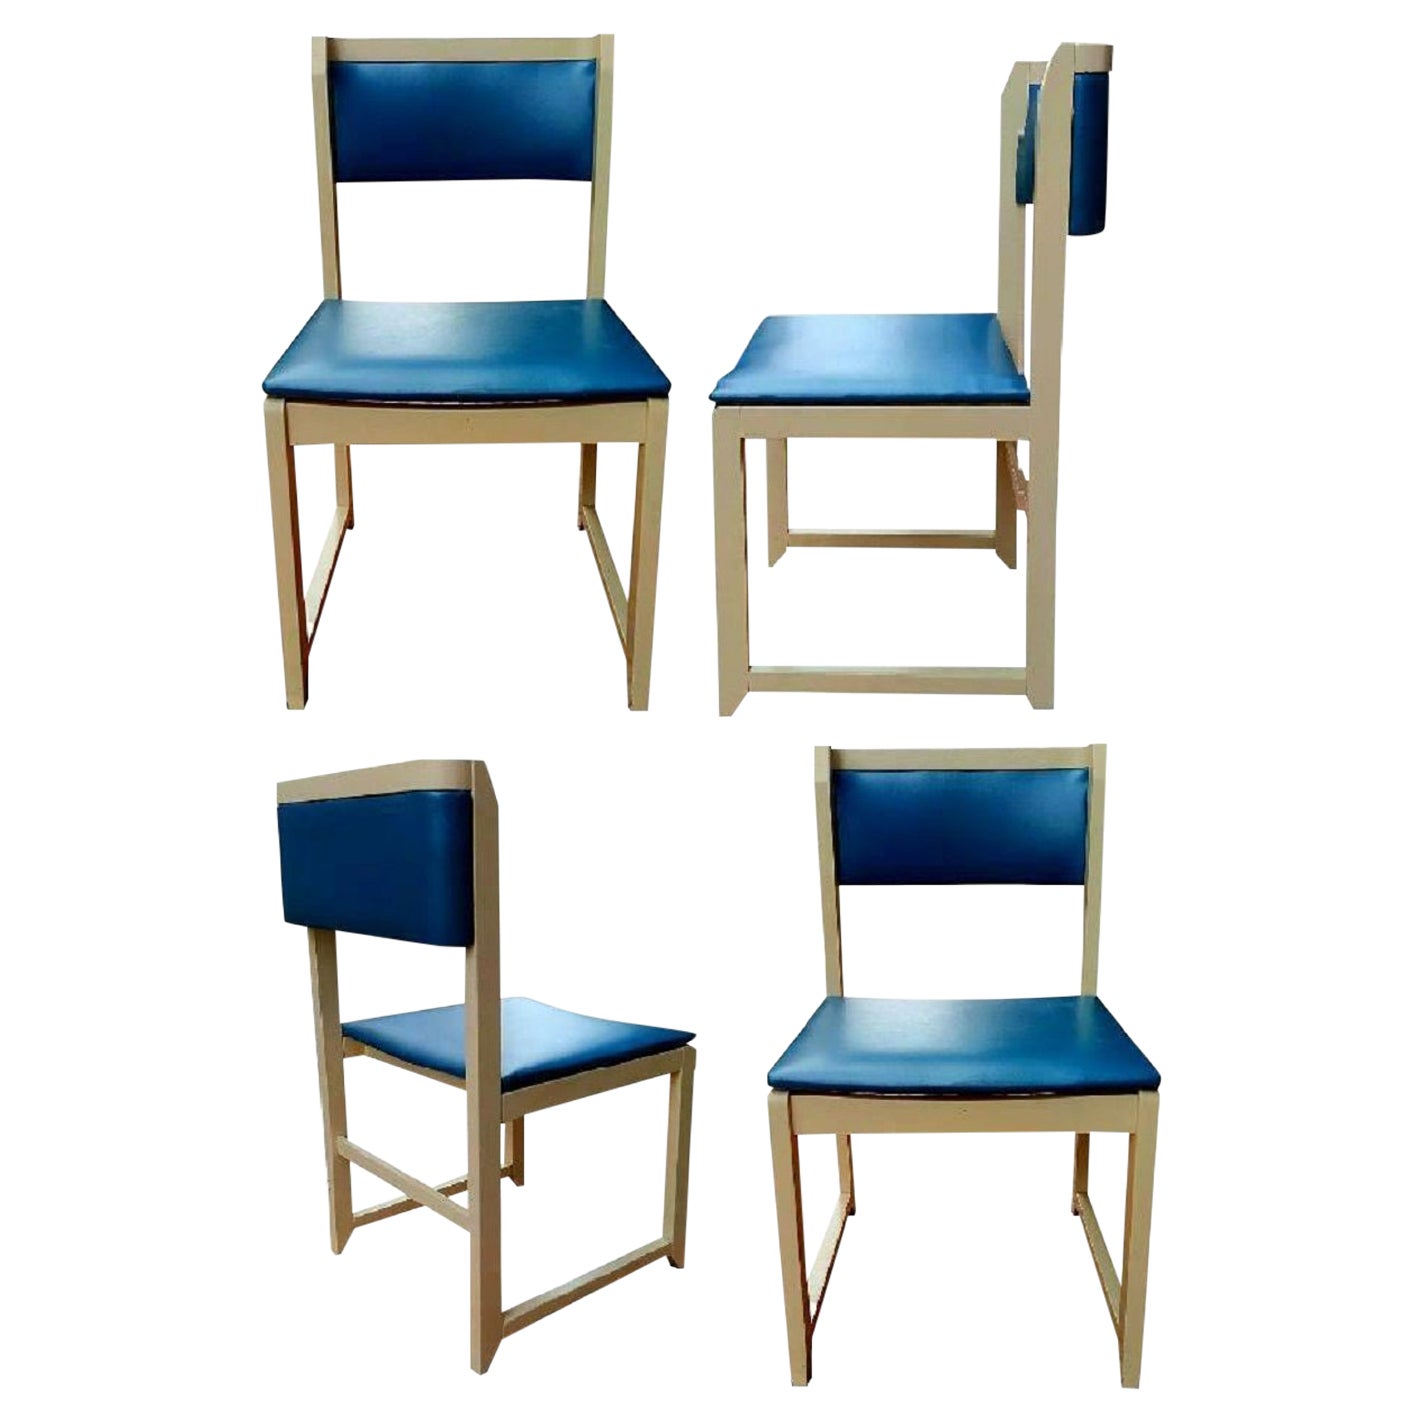 Lot of Four Design Wood Chairs Original, 1970s